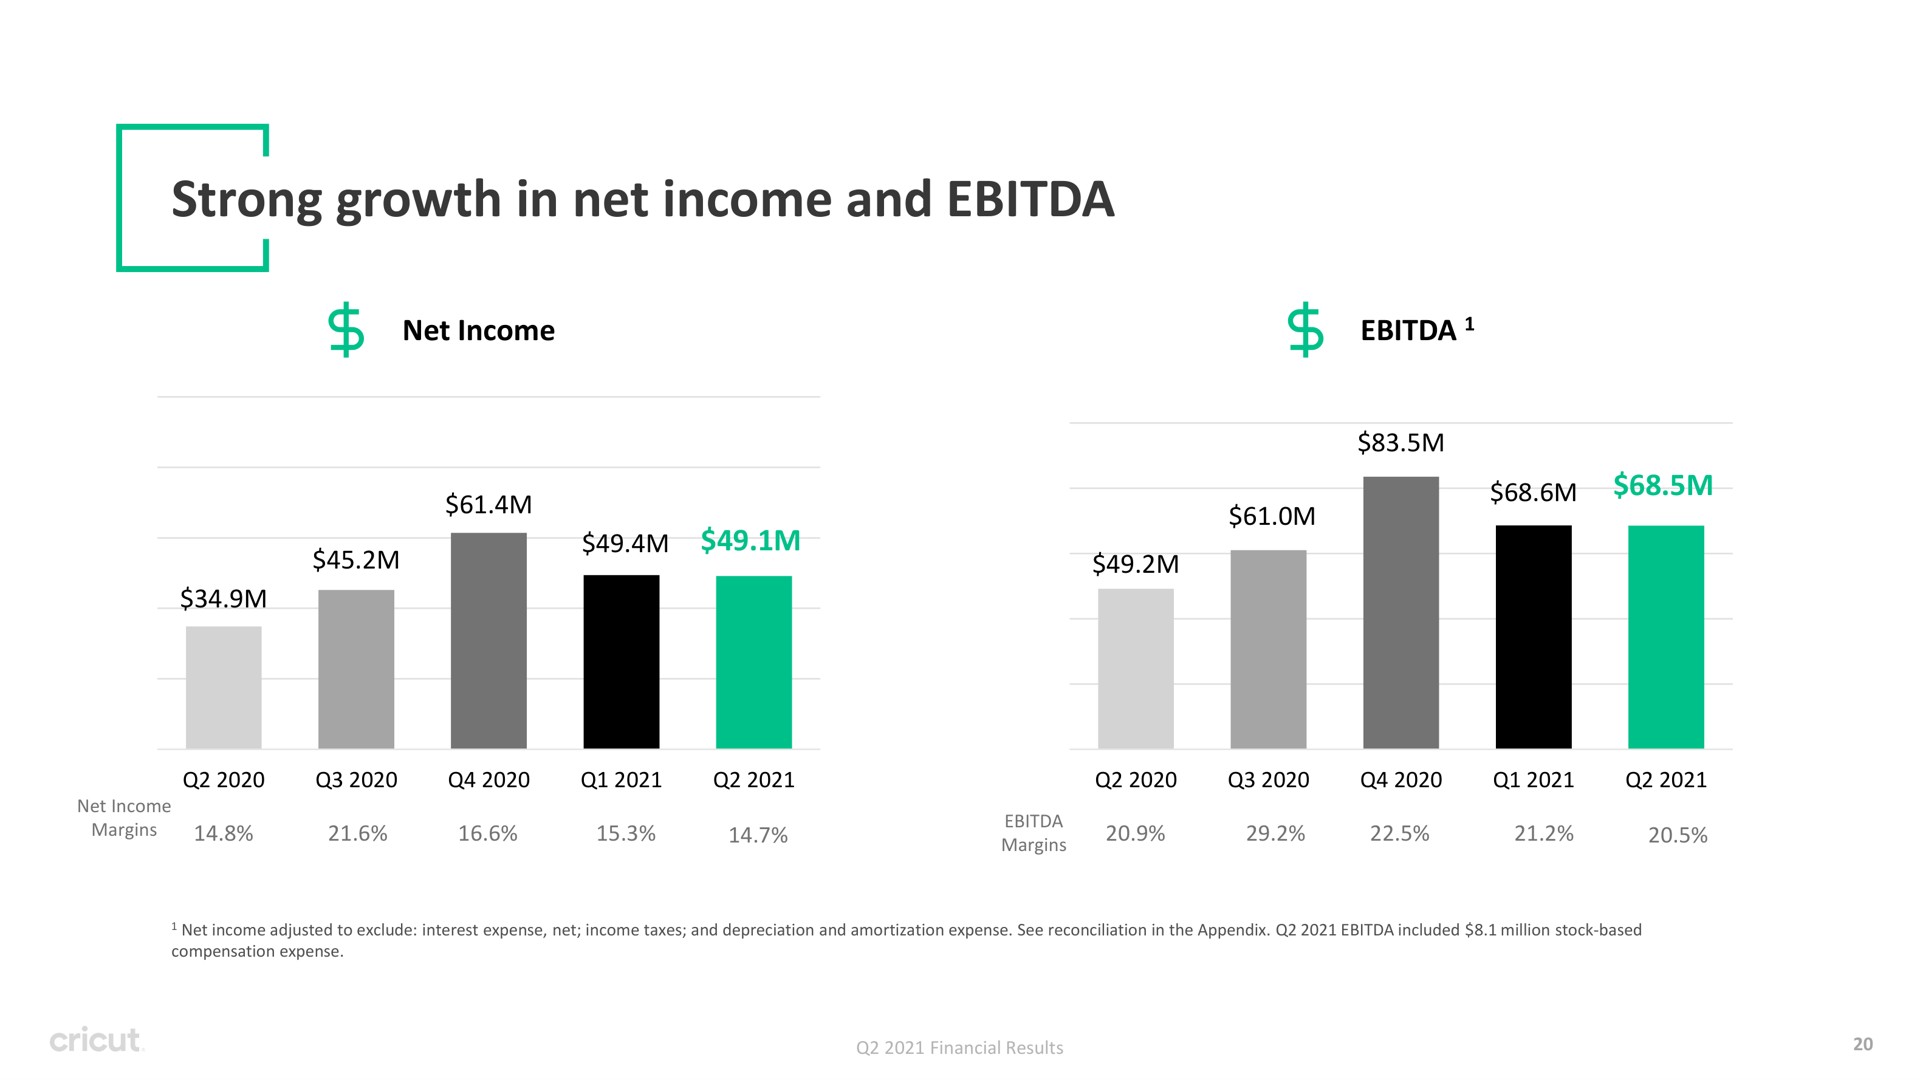 strong growth in net income and | Circut